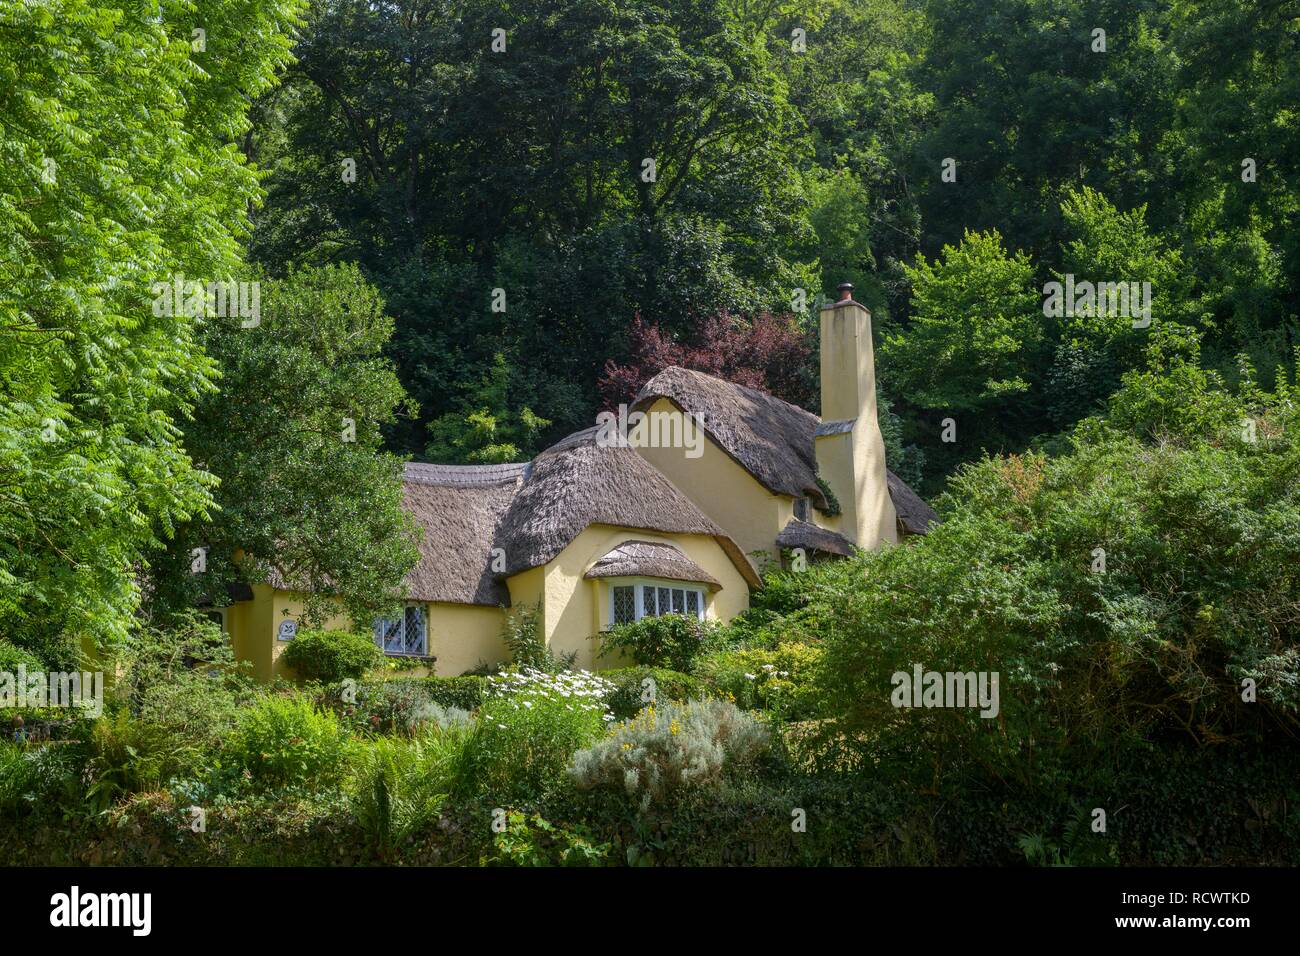 Thatched house, Selworthy, England, Great Britain Stock Photo